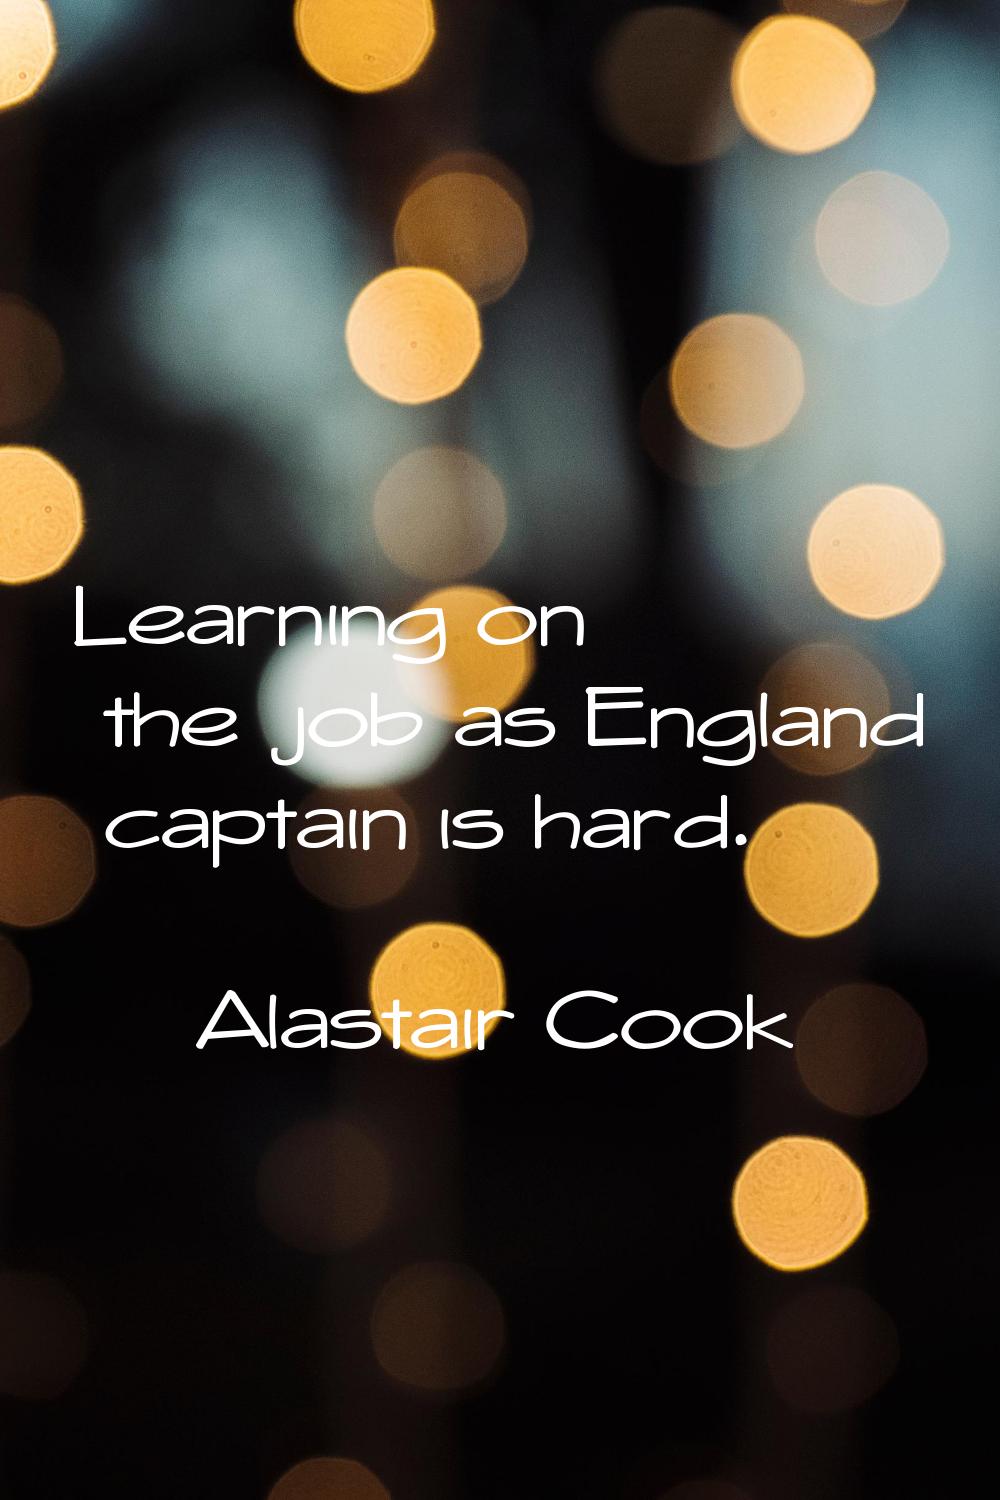 Learning on the job as England captain is hard.